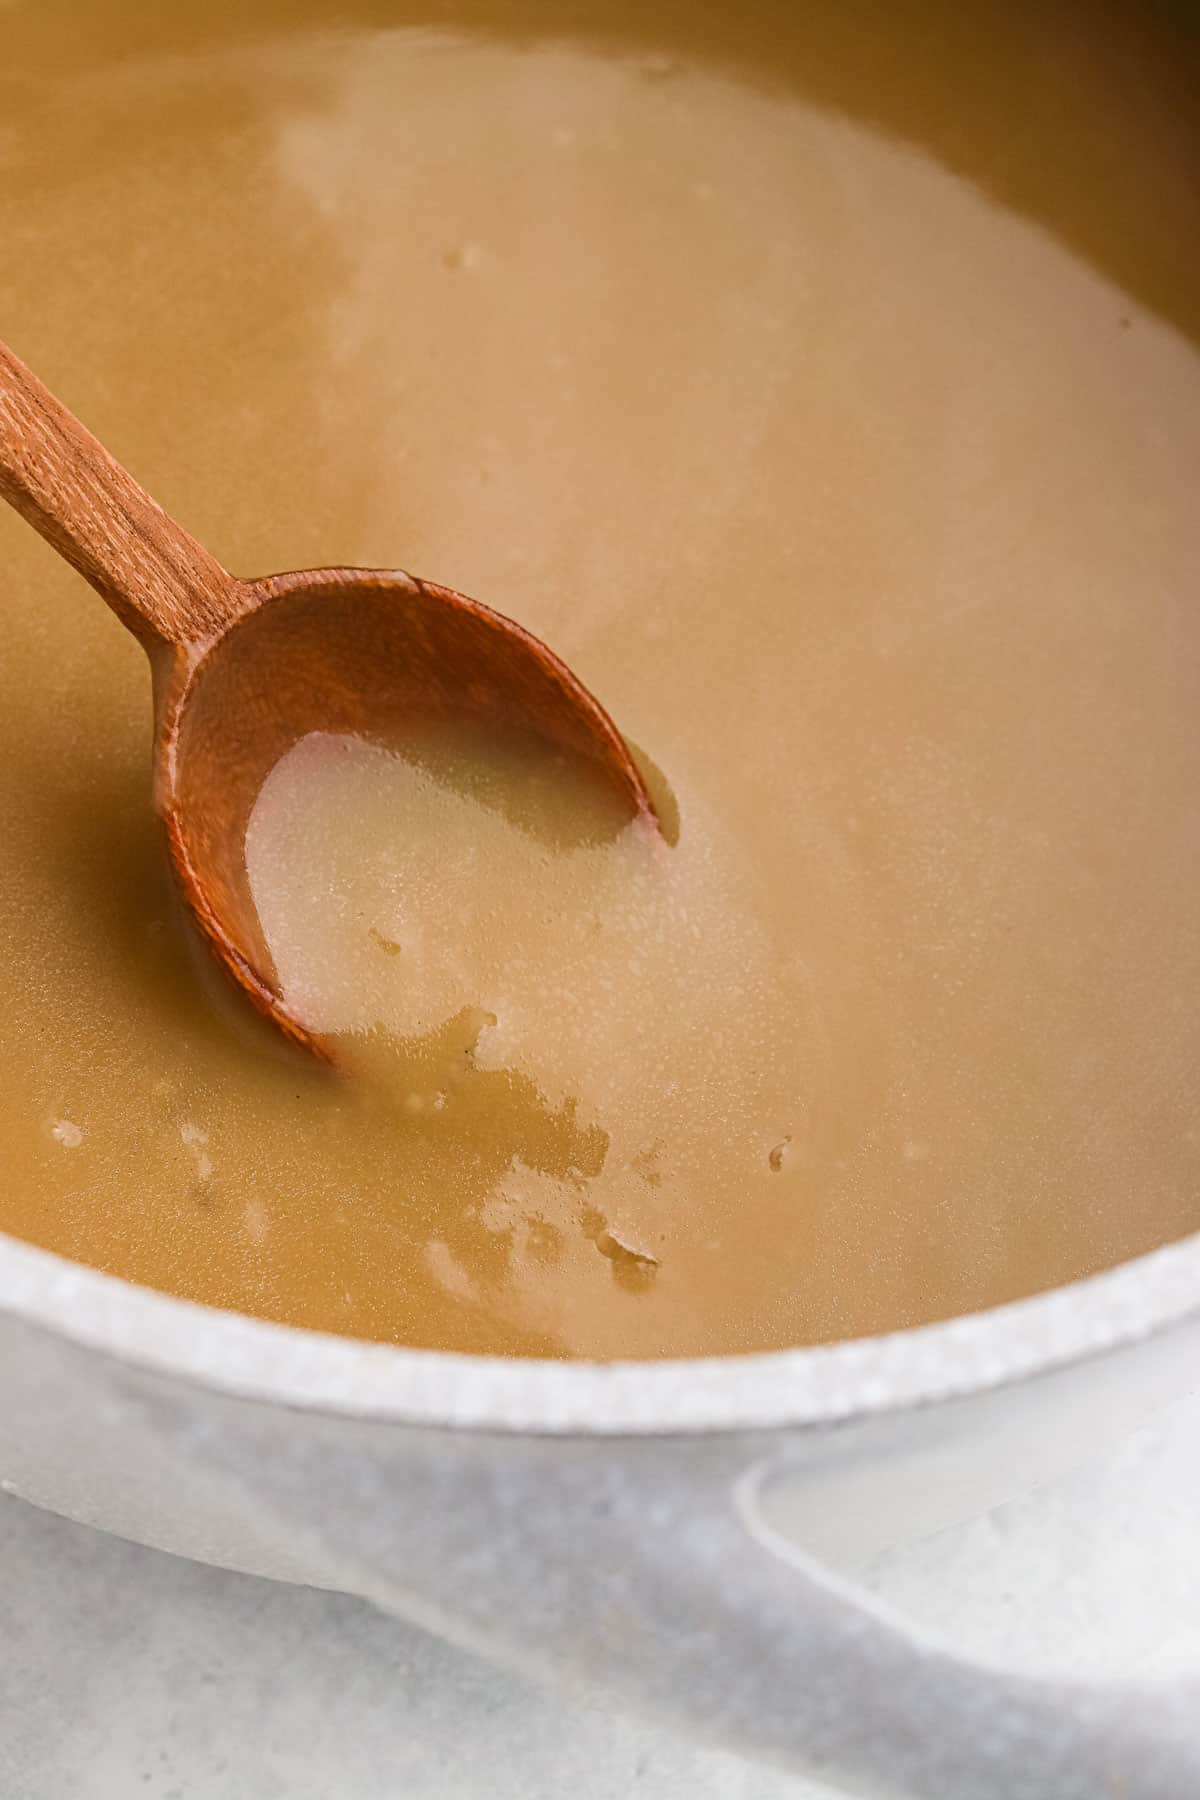 A wooden spoon in a saucepan of brown gravy